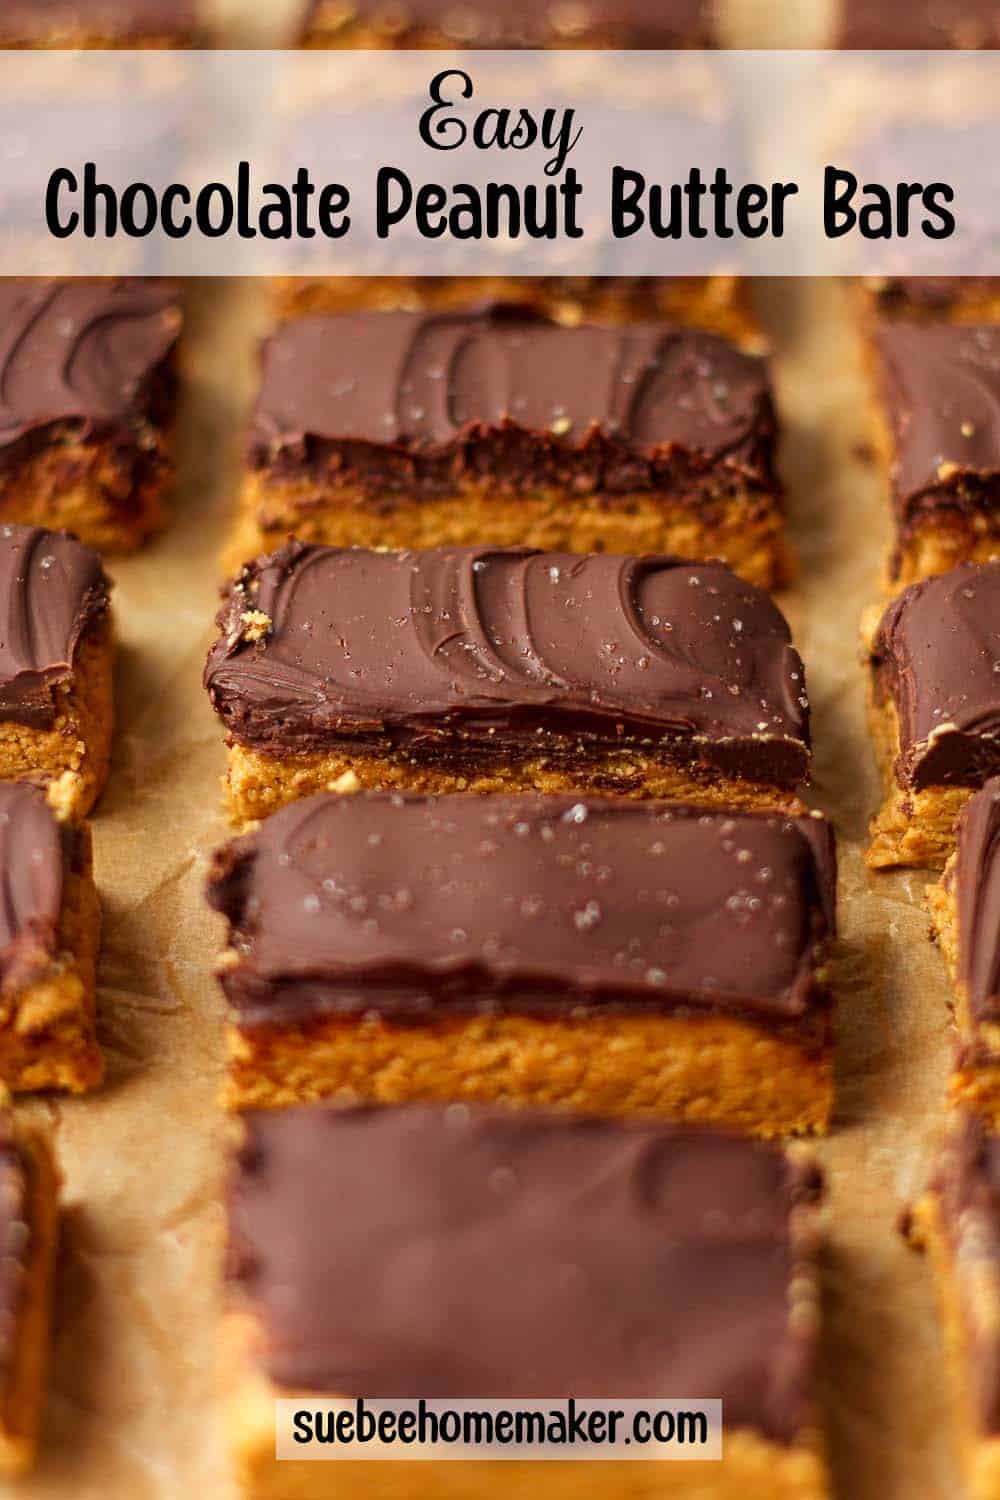 A side view of rows of peanut butter bars with Pinterest text.